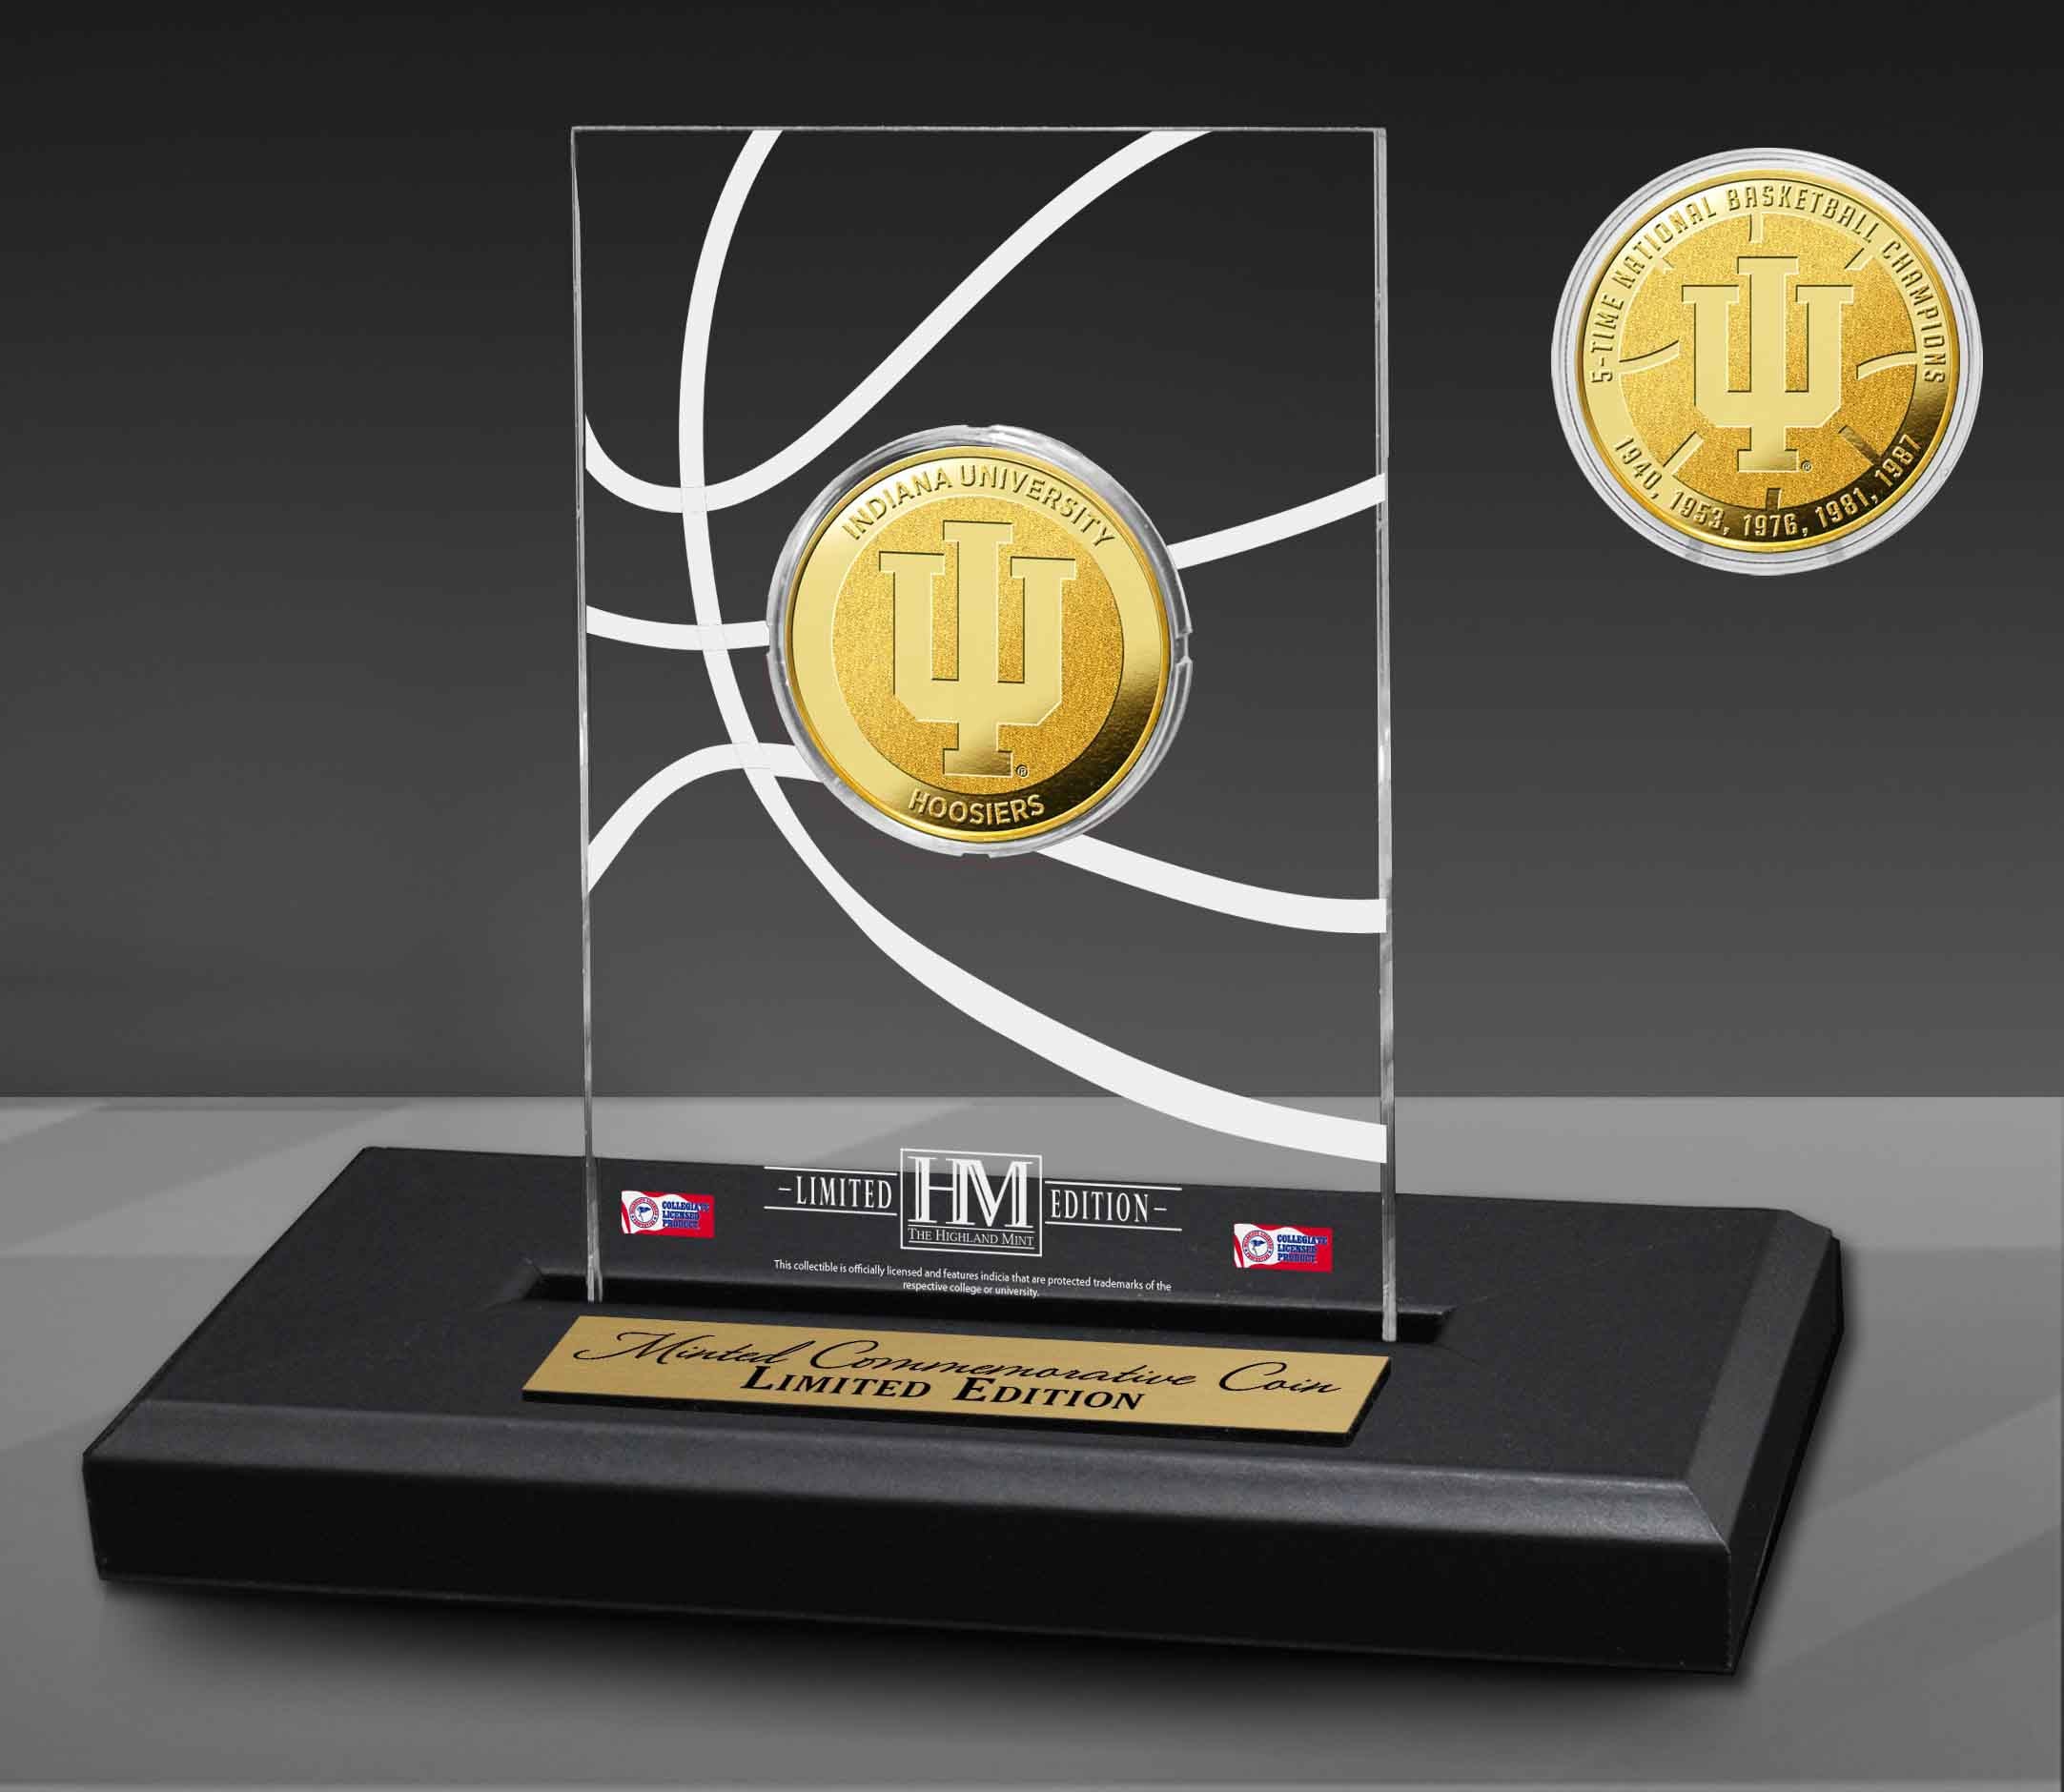 Indiana University Hoosiers Gold Coin in Acrylic Display